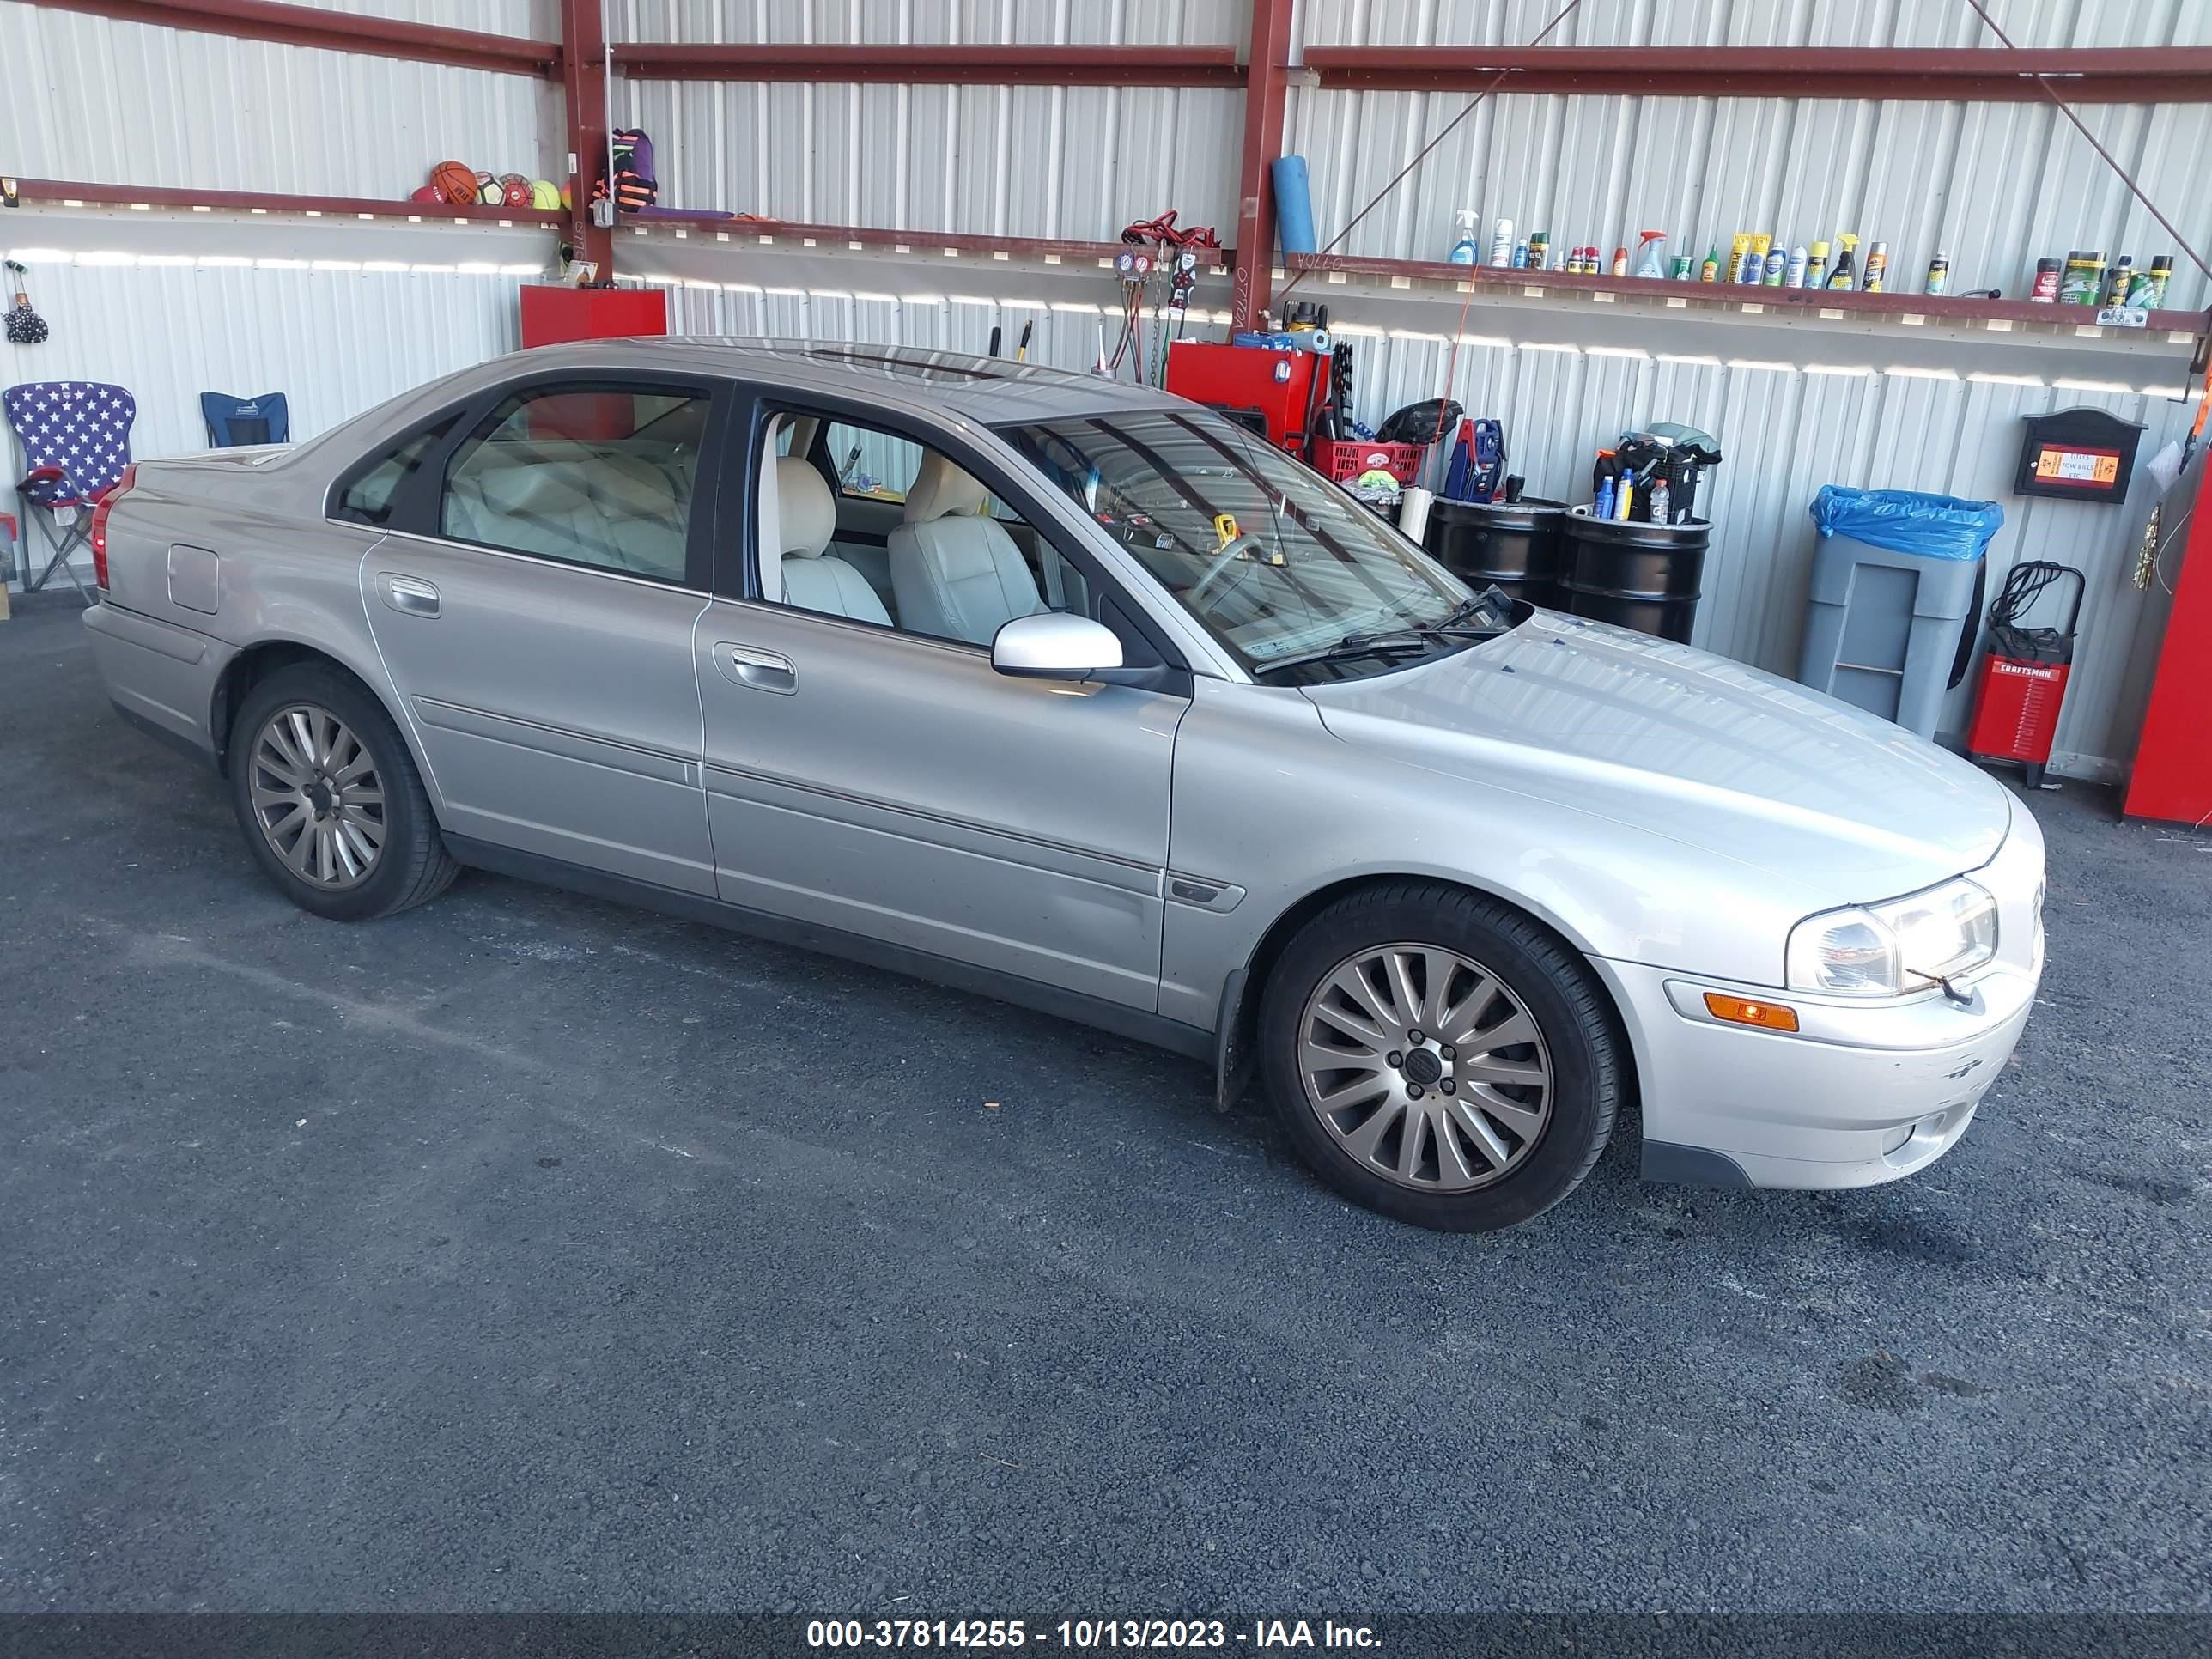 vin: YV1TS91Z141352801 YV1TS91Z141352801 2004 volvo s80 2900 for Sale in 12701, 65 Kaufman Rd, Monticello, New York, USA